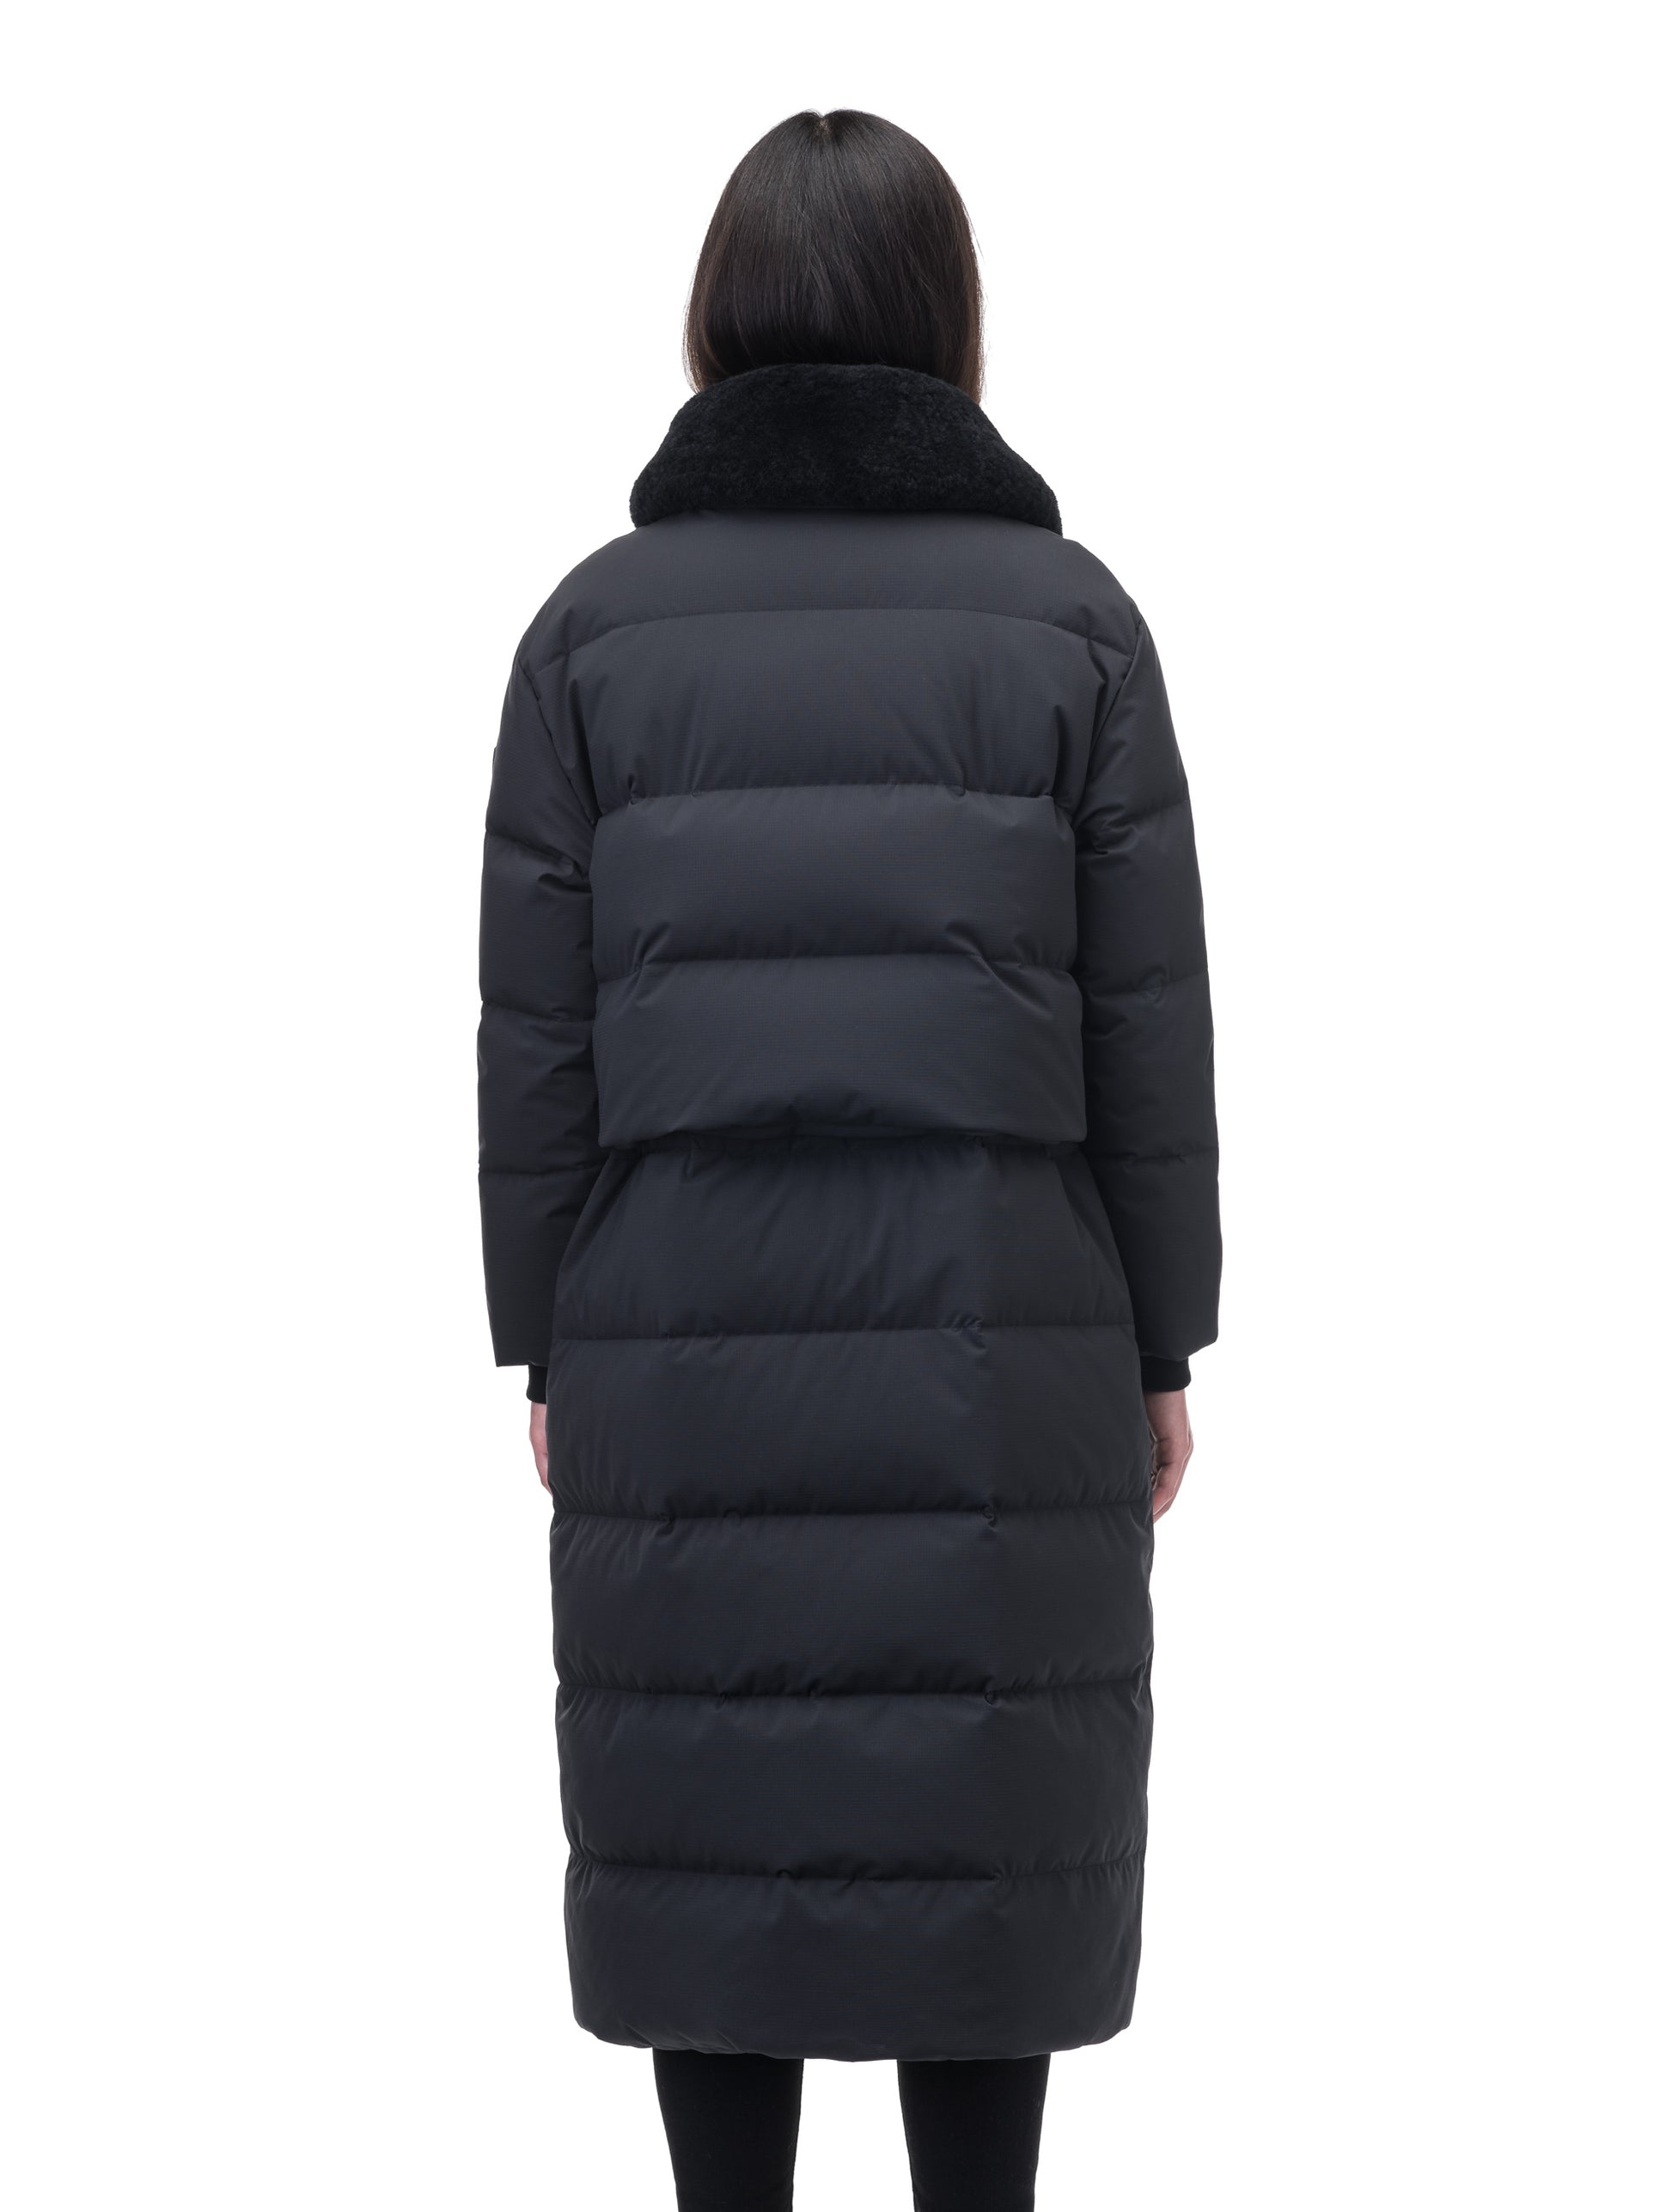 Forma Ladies 2-in-1 Long Quilted Jacket in below the knee length, quilted body, soft ribbed cuffs, removable shearling collar and pockets, and removable cinchable skirt, in Black